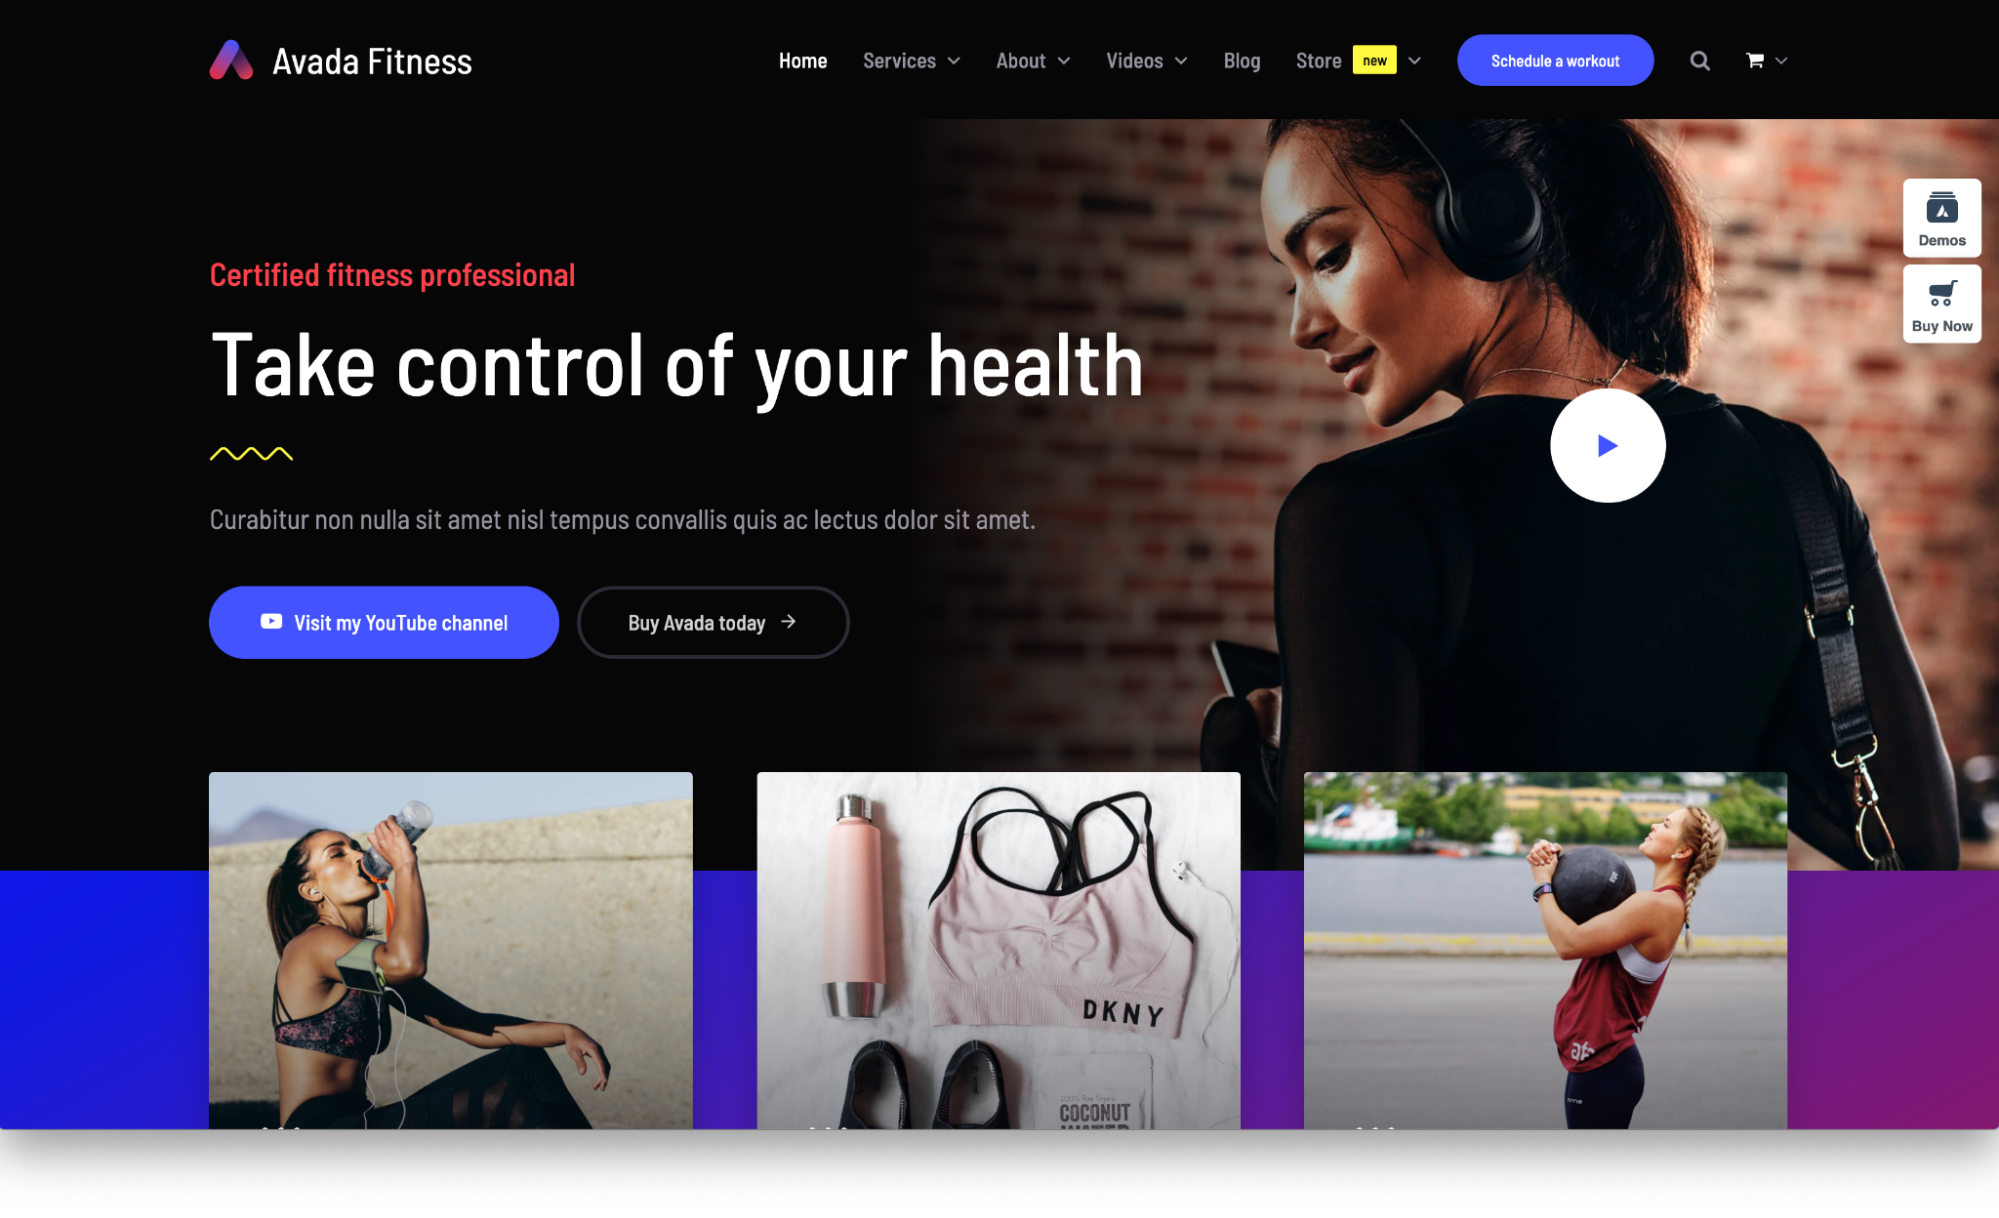 The 20 Best Personal Trainer Website Designs - My Personal Trainer Website